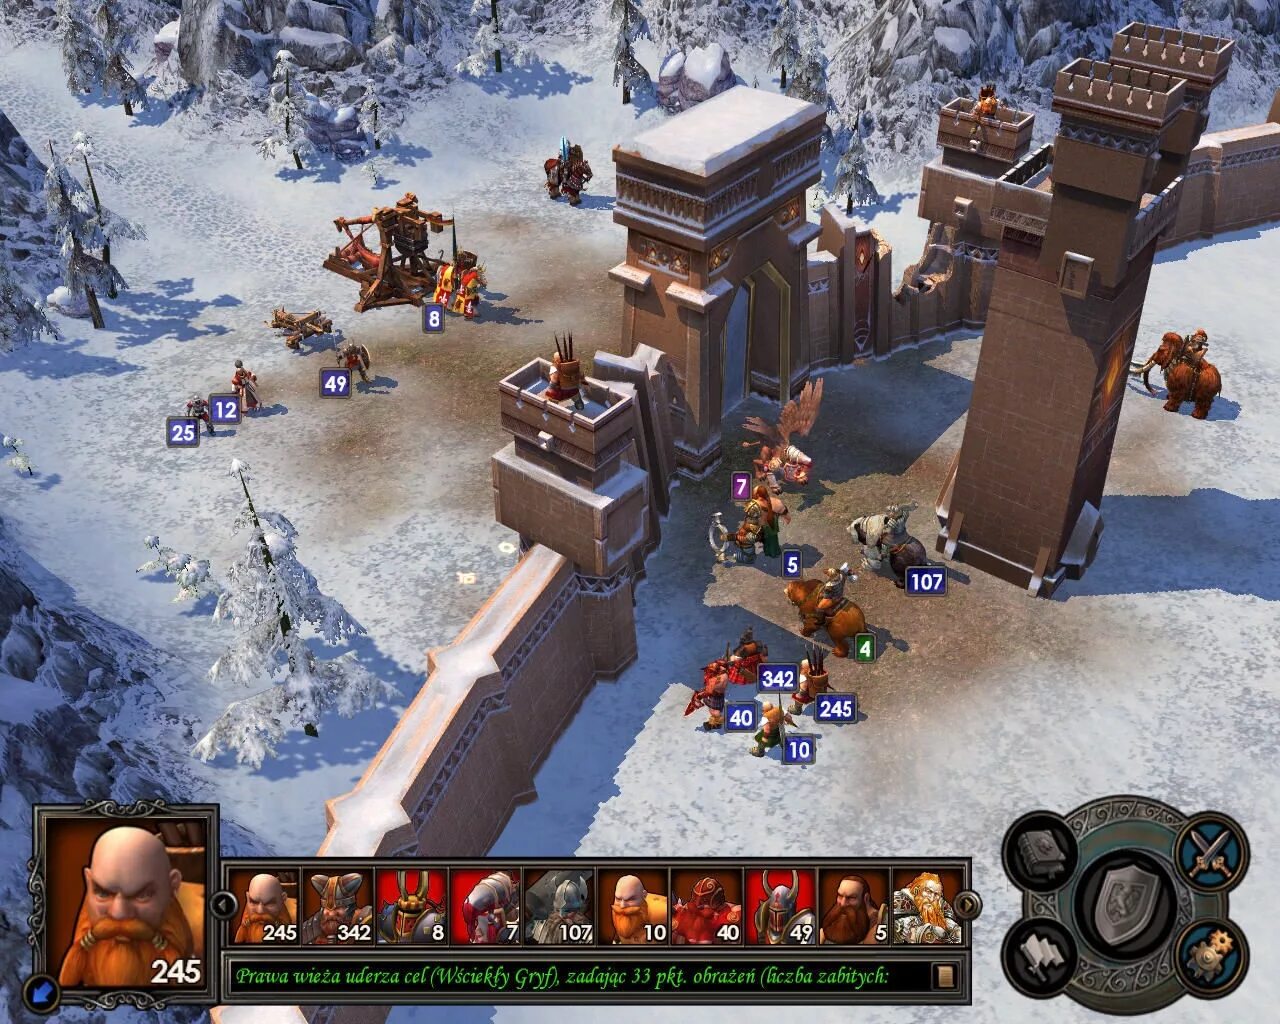 Might and magic heroes fates. Heroes of might and Magic v Hammers of Fate. Герои 5 Hammers of Fate. Герои меча и магии v. владыки севера. Герои 5 владыки севера.